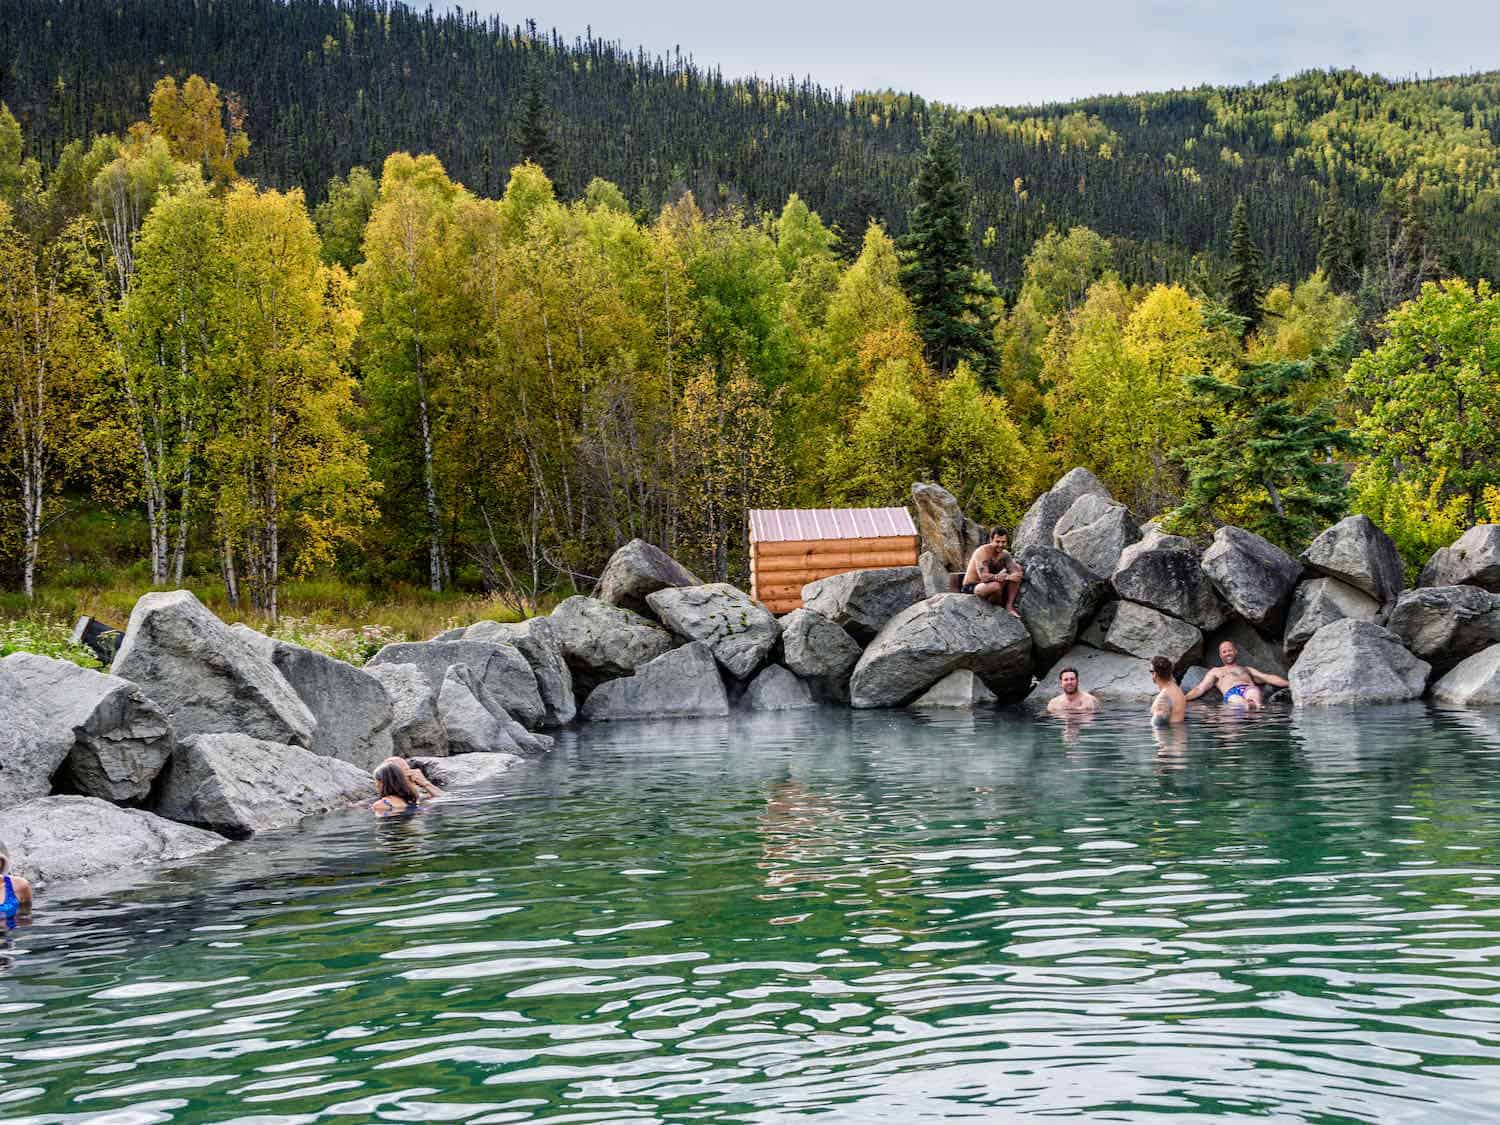 people soaking in a hot springs surrounded by the forest